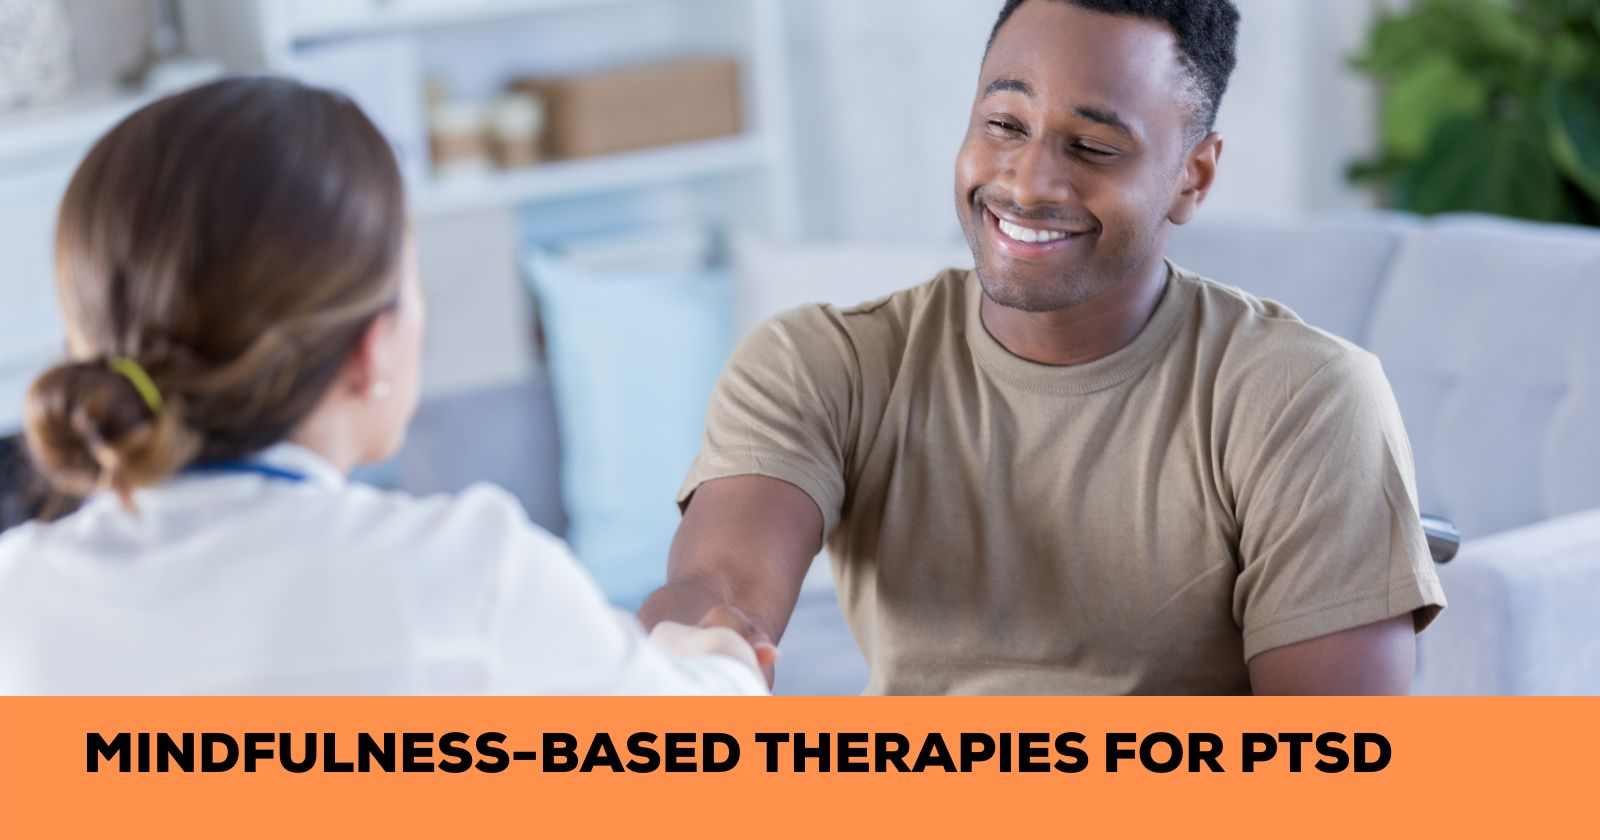 Mindfulness-Based Therapies for PTSD
Man shaking hand with doctor